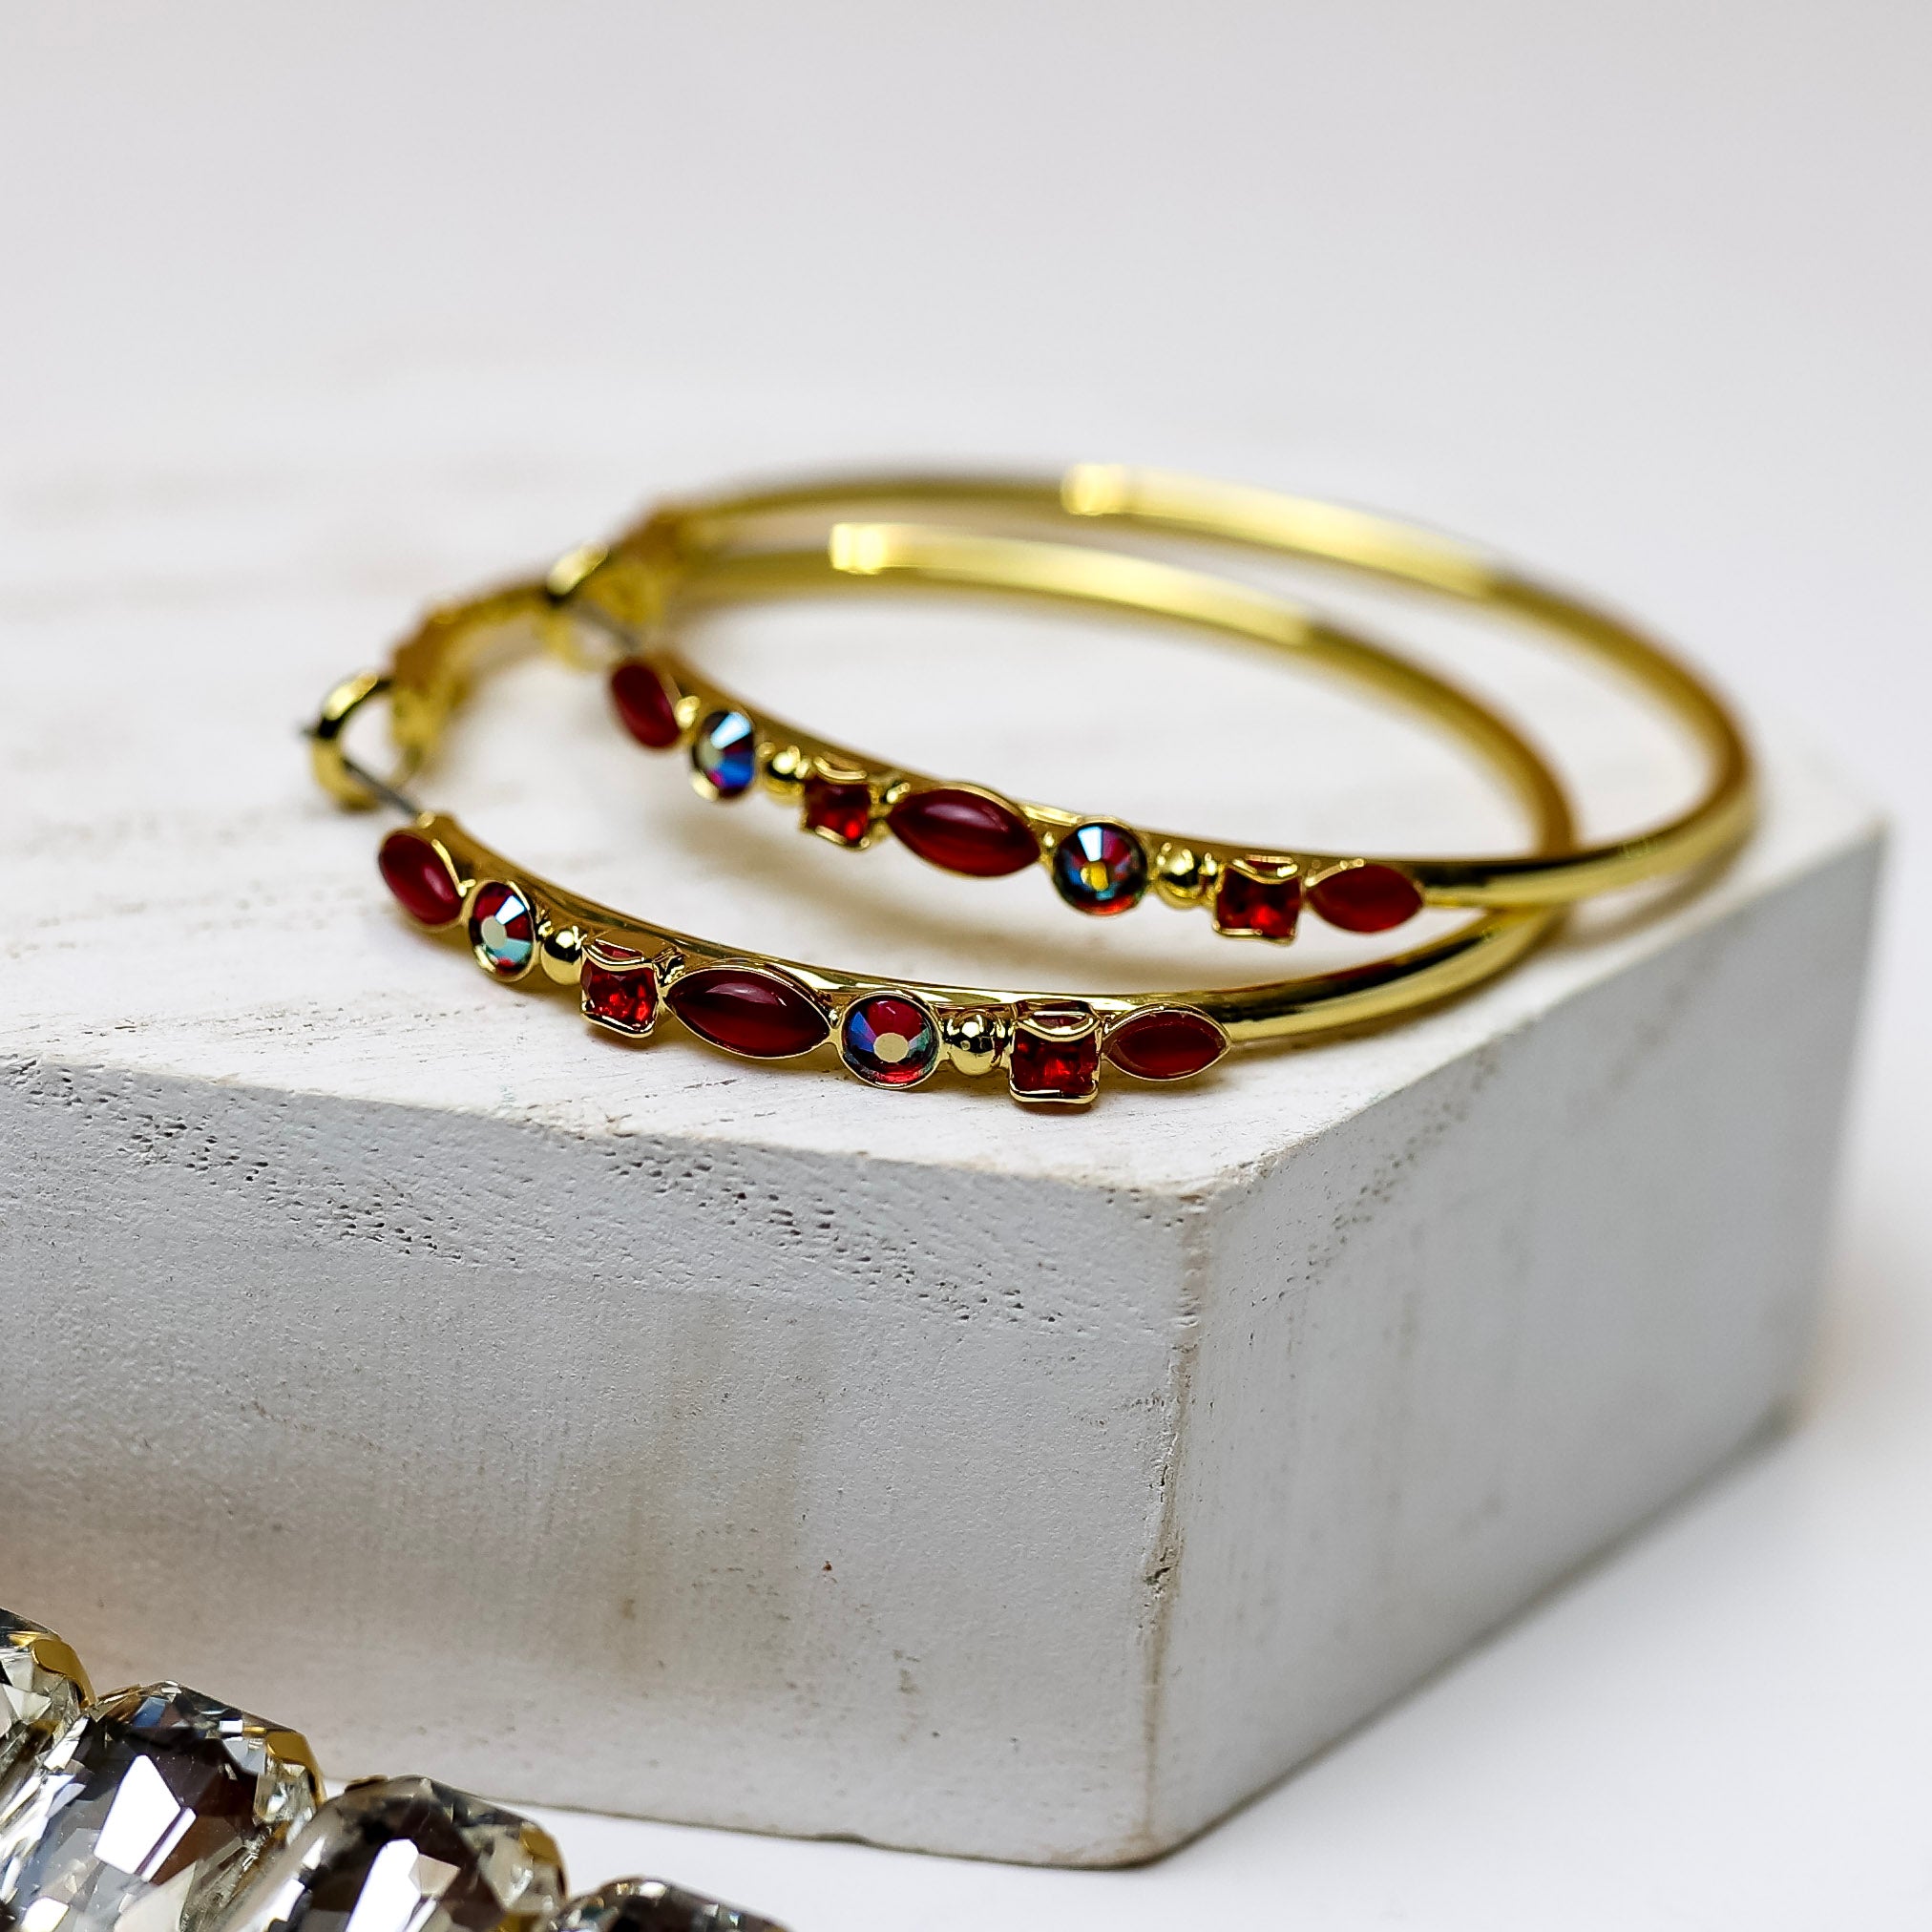 A pair of gold-tone circle hoop earrings with dark red crystals on the front. Pictured on a white background with crystal necklaces.